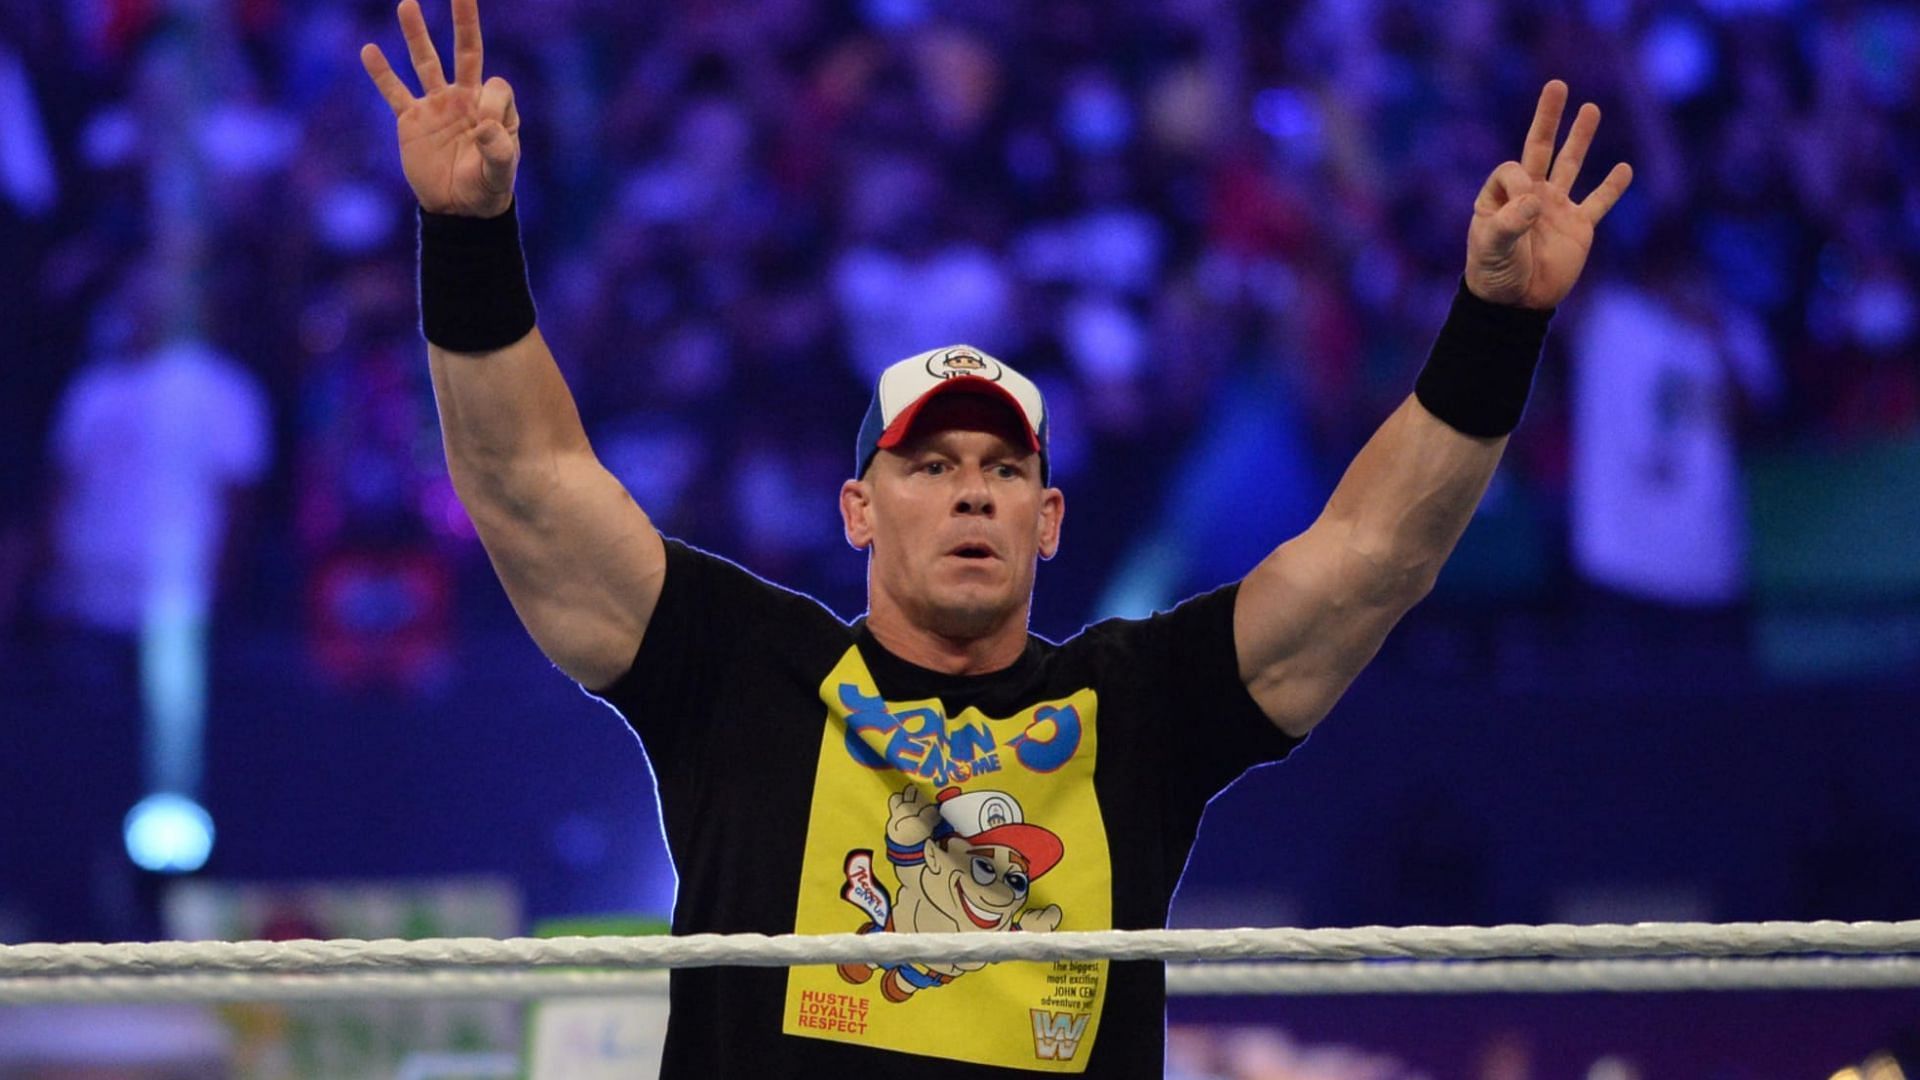 4 Ways John Cena could return to WWE before the end of 2022